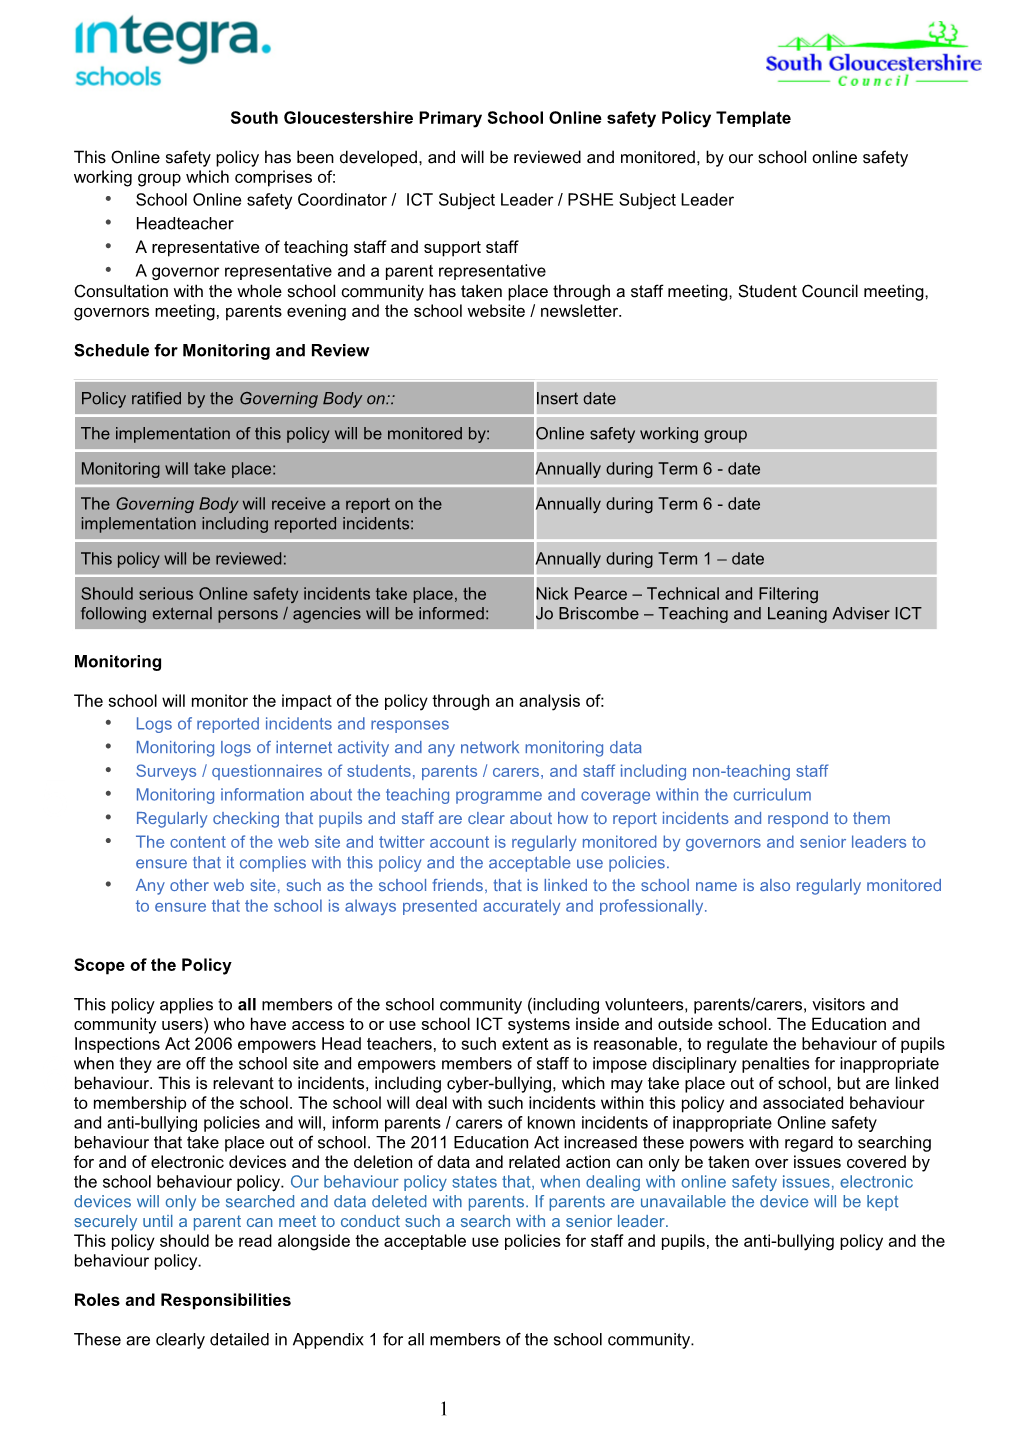 South Gloucestershire Primary School Online Safety Policy Template